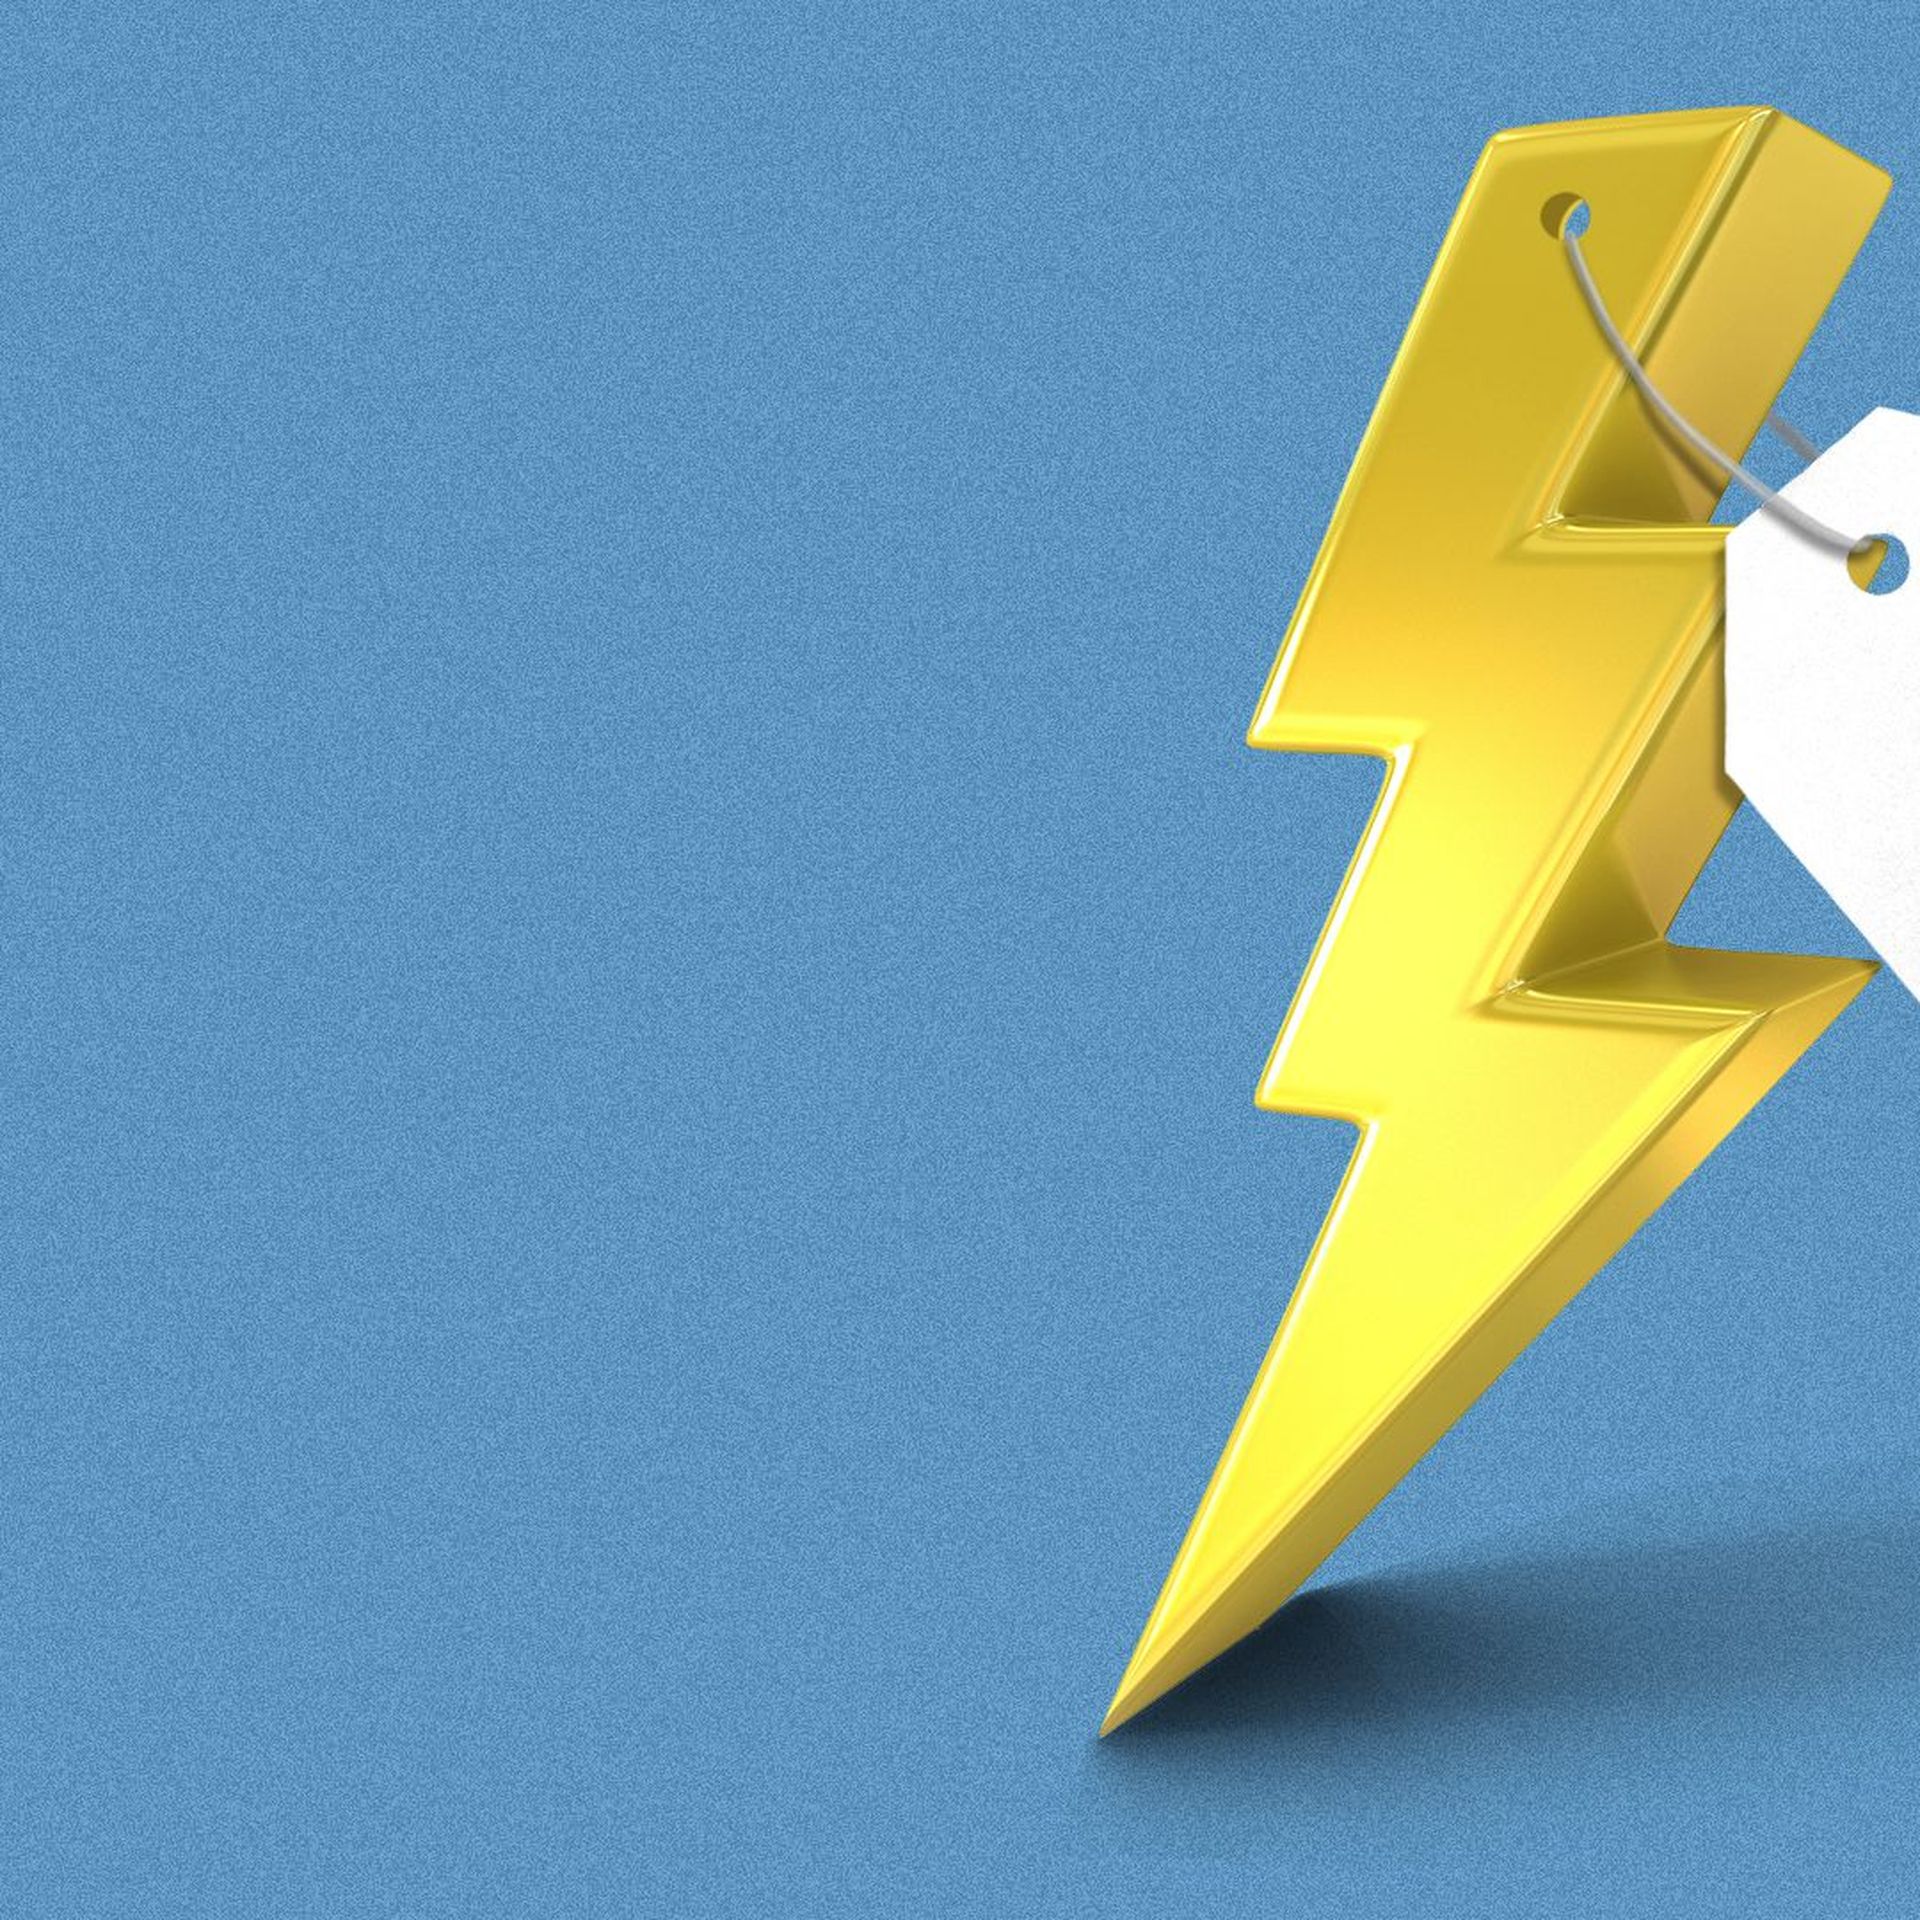 Illustration of a lightning bolt with a price tag with an extra dollar sign added.